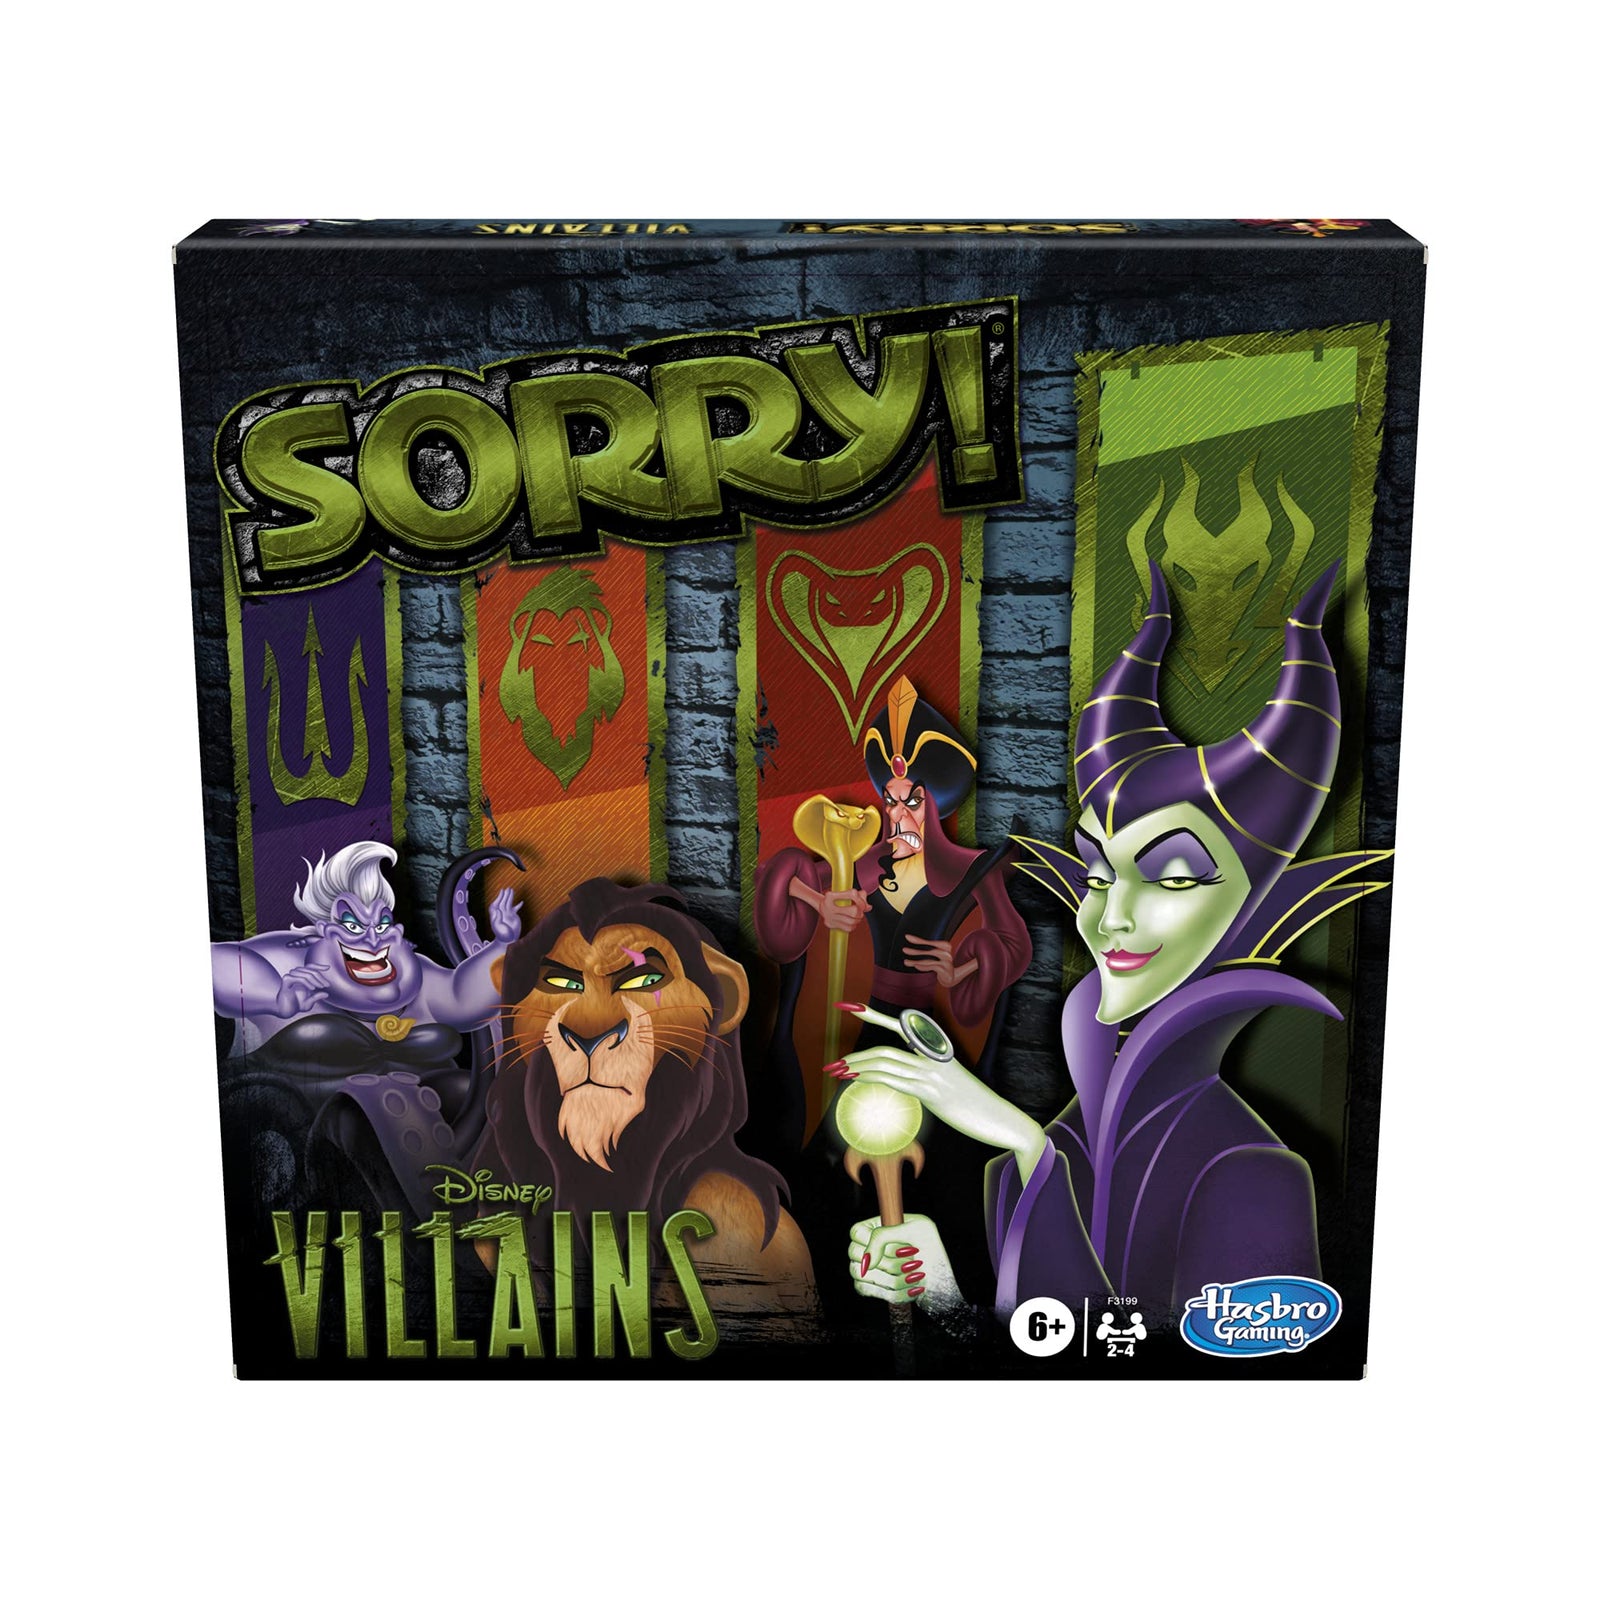 Hasbro Gaming Sorry! Board Game: Disney Villains Edition Kids Game, Family Games for Ages 6 and Up (Amazon Exclusive)